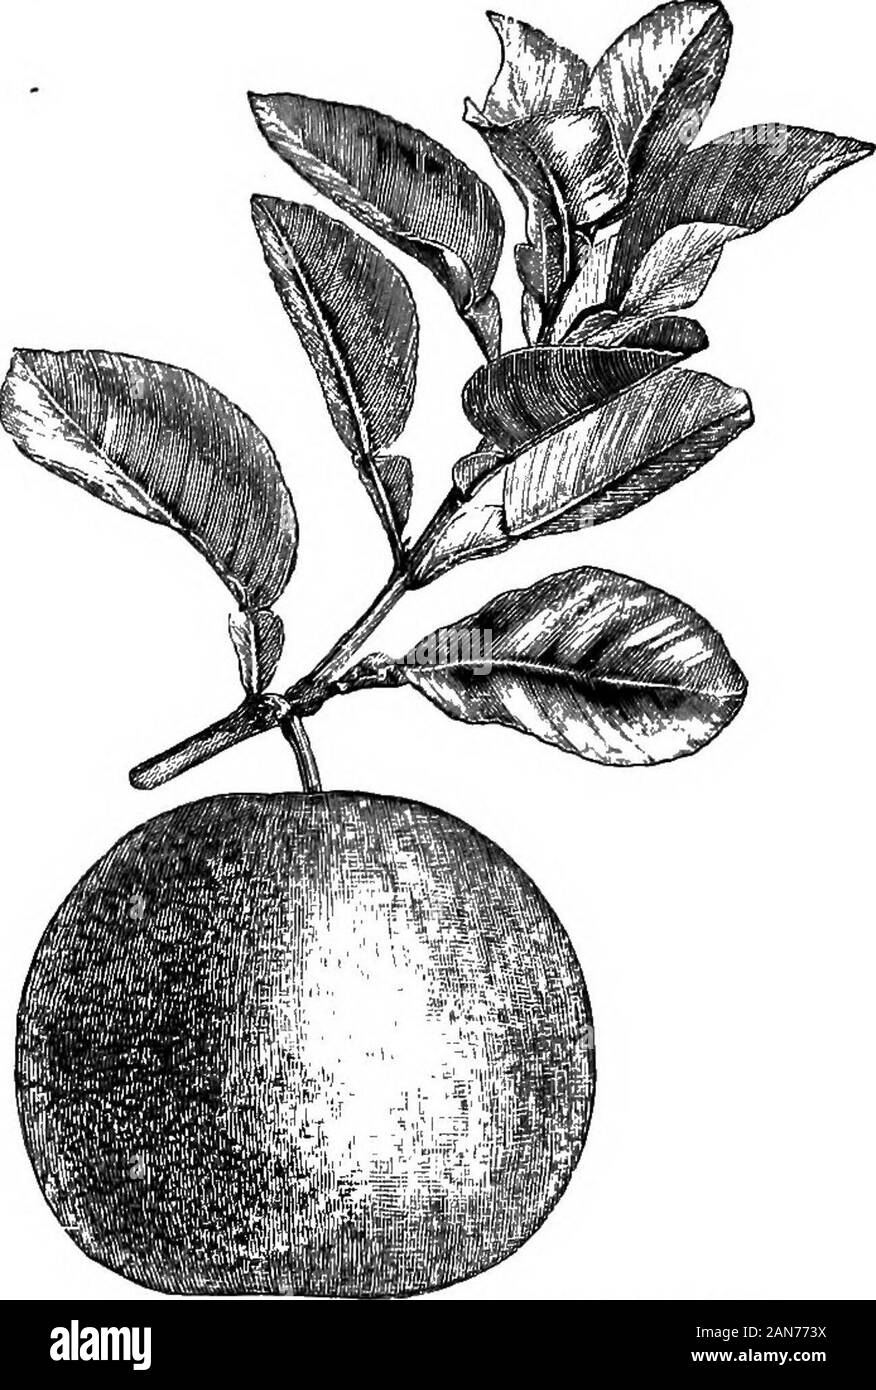 An illustrated encyclopædic medical dictionaryBeing a dictionary of the technical terms used by writers on medicine and the collateral sciences, in the Latin, English, French and German languages . e variety with a small, sweet fruit, [B,214]—c. latifolia. See C. aurantium latifolium.—C. limetta.Tv., Umettier. Ger., Limette, Limettenbaum. It., lime. 1. OfDe Candolle, the Citrus bergamia- of Risso, and the C. limettaof Risso in part, [B, 5, 212 (o, 24).] 2. Of Risso, a variety of theCitrus medica of Linnaeus. It has a pale-yellow fruit, oval orglobular, the Adams apple (pomo dAdamo) of the Ital Stock Photo